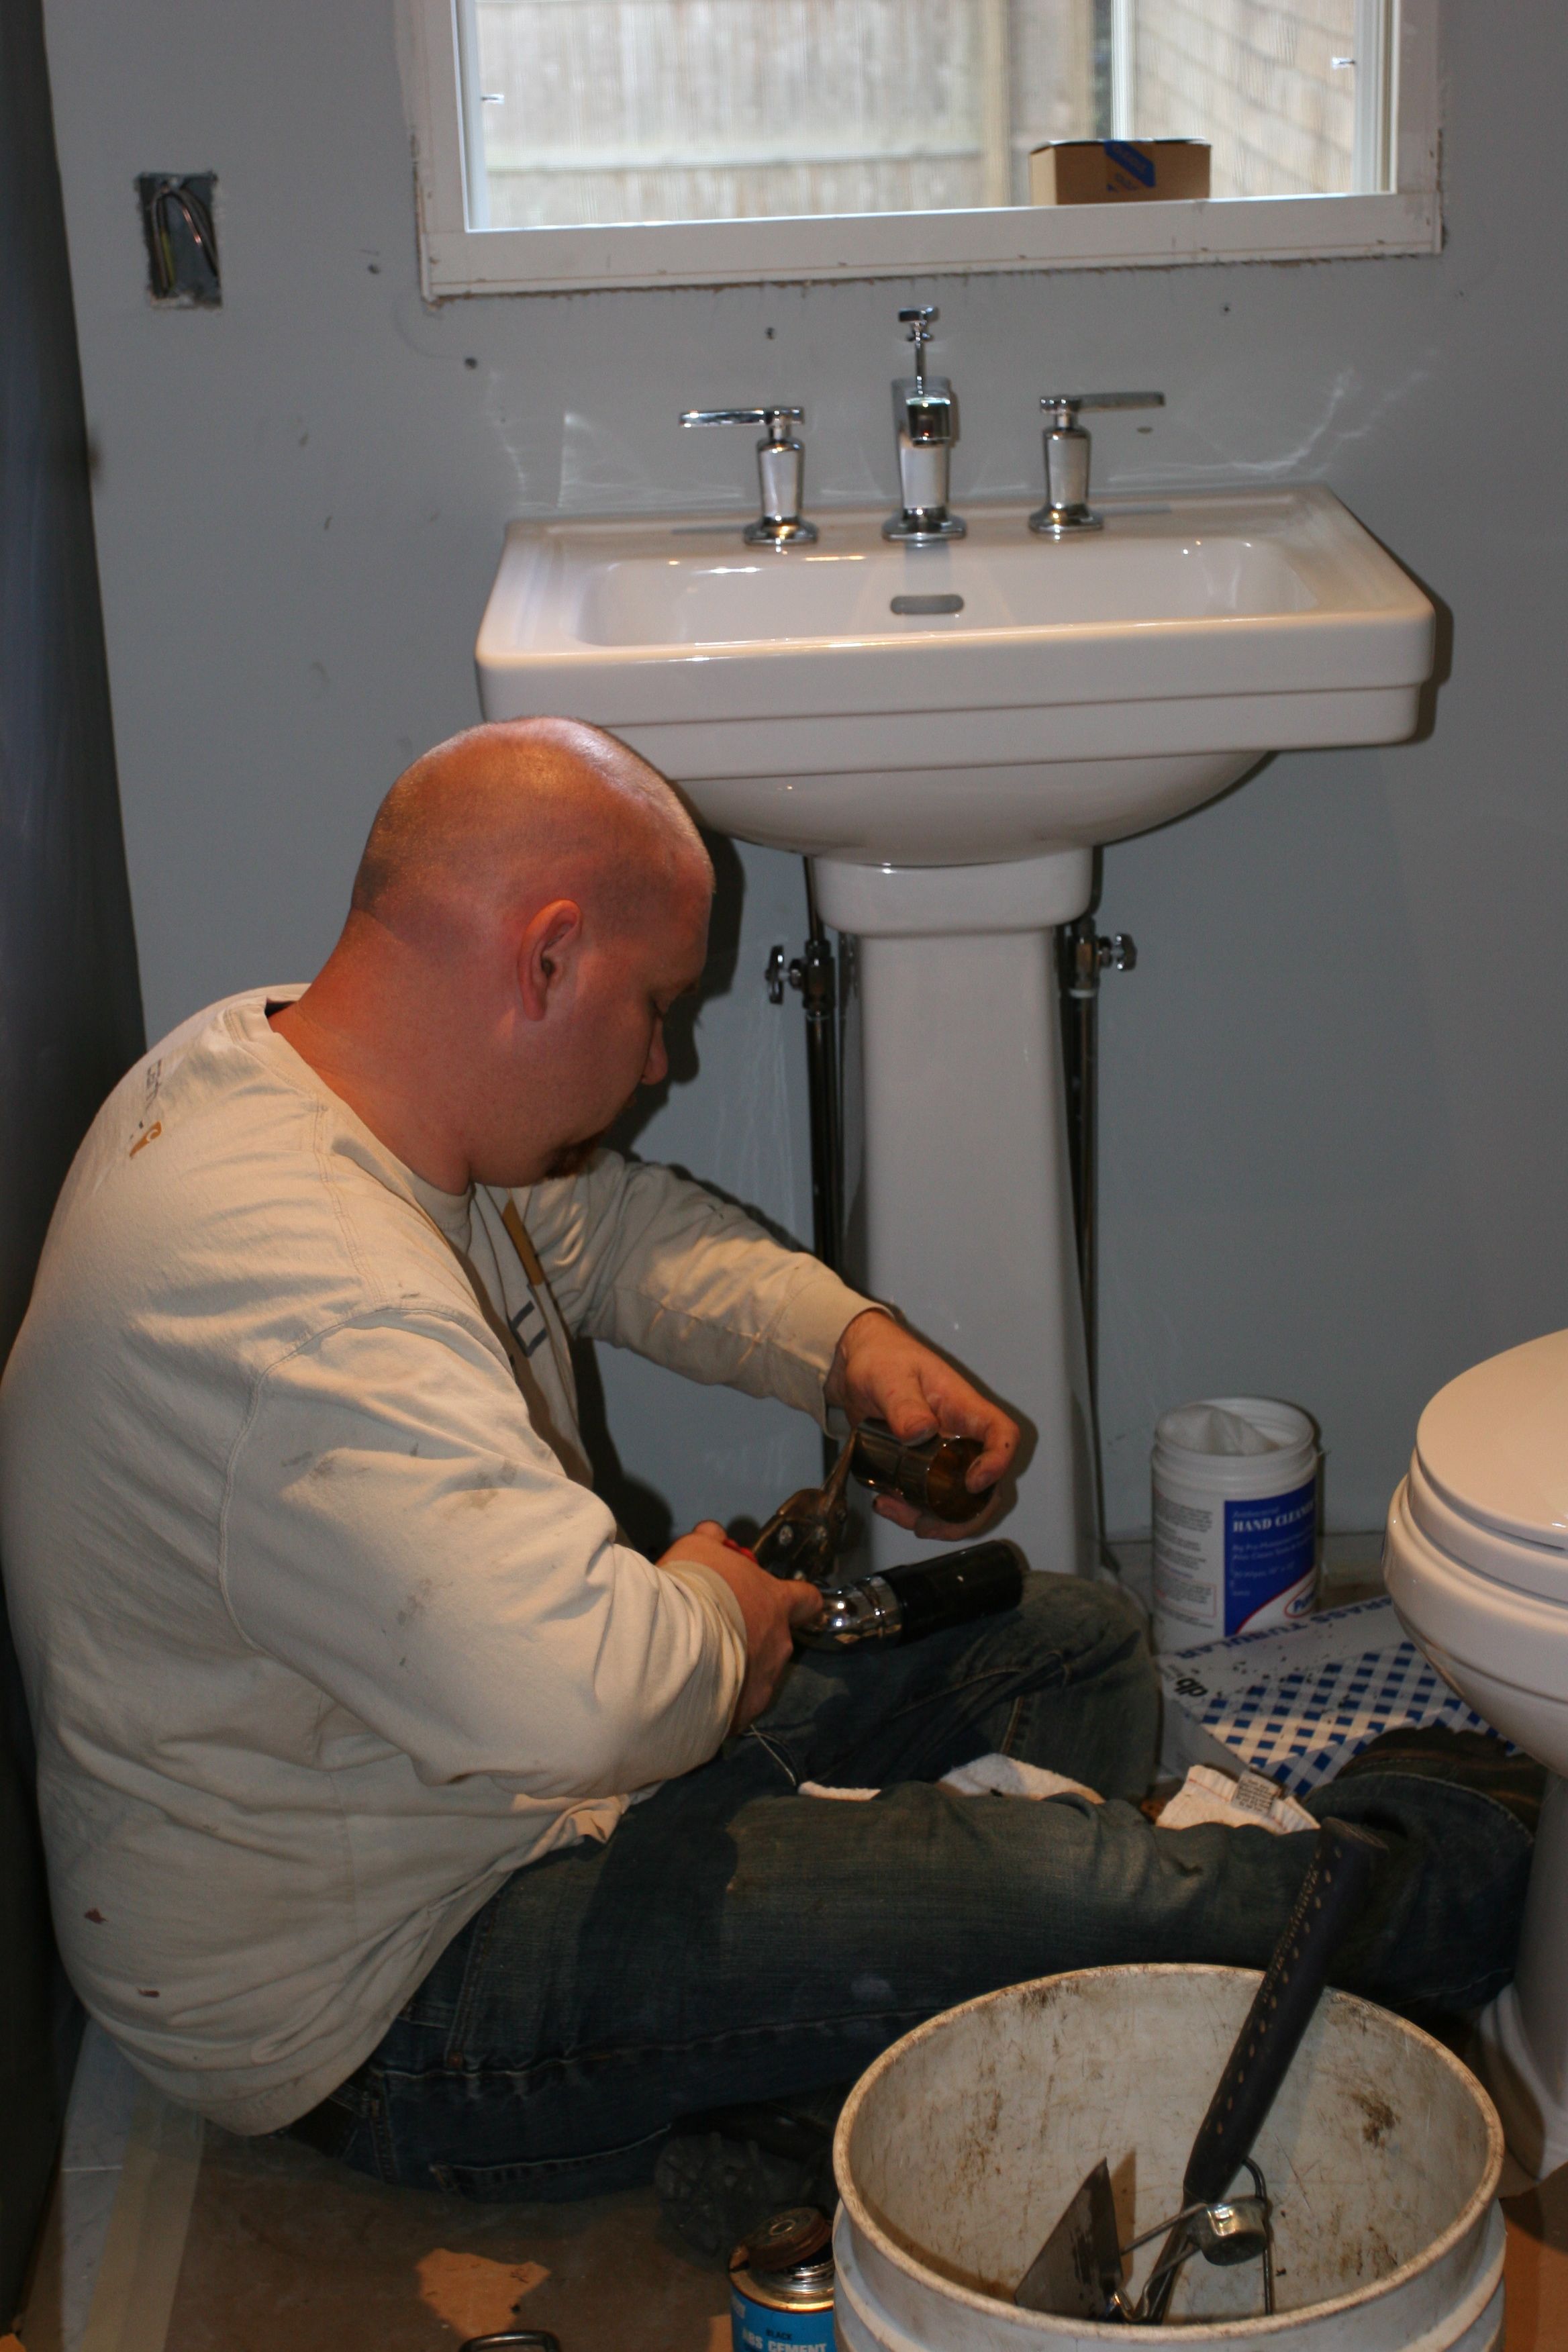 Matt, of Team Plumbing, working quietly by himself. I think he likes it that way.